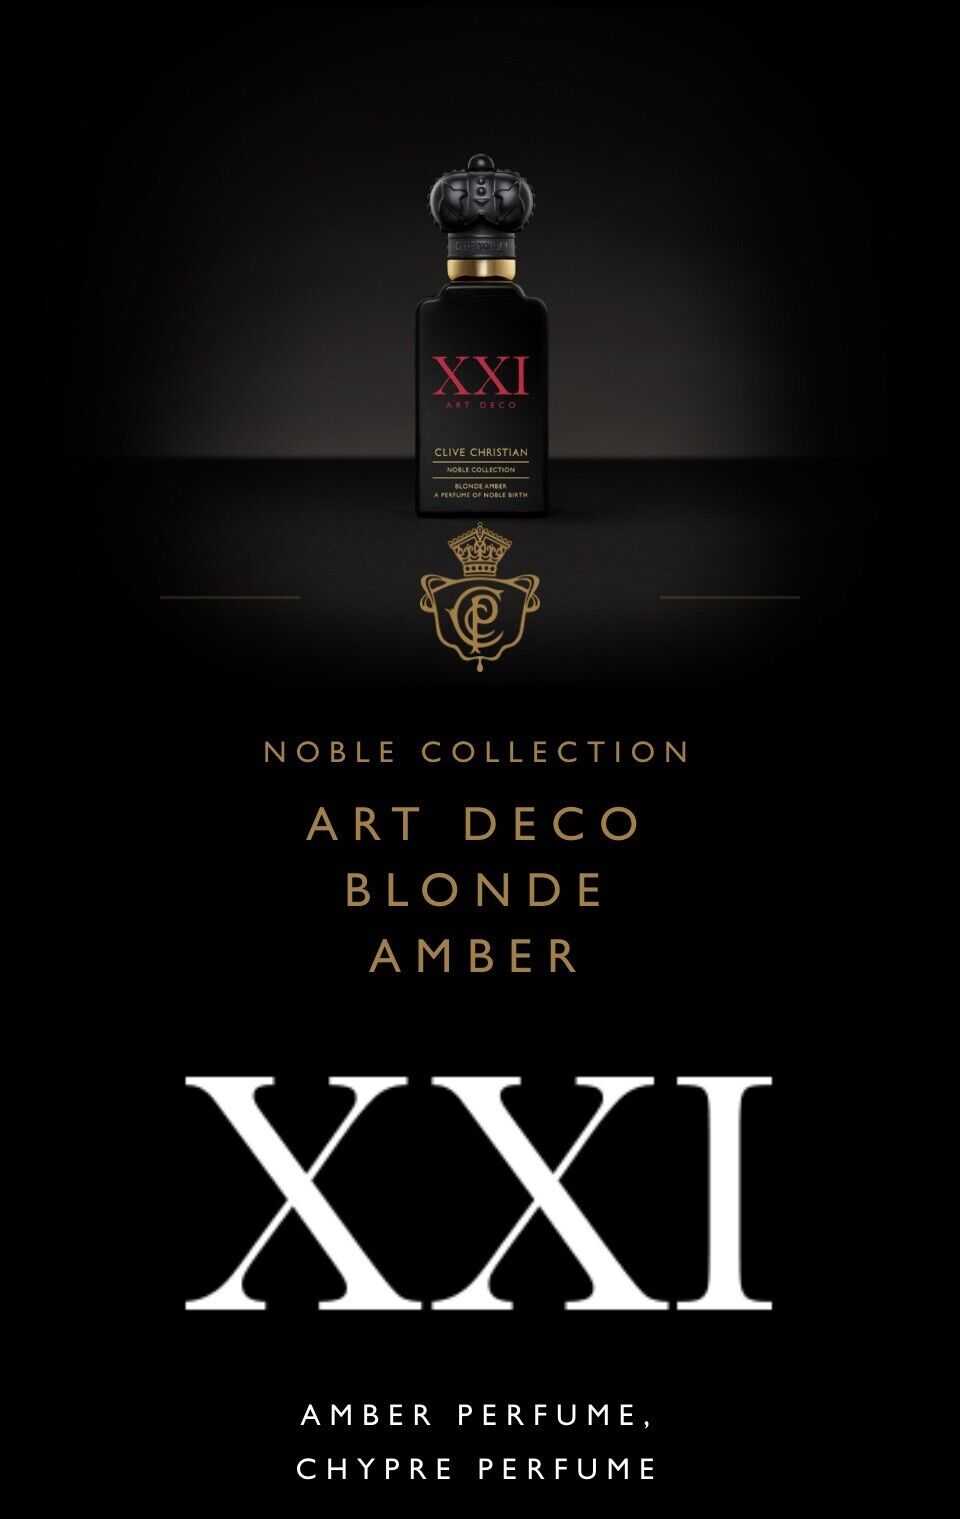 CLIVE CHRISTIAN NOBLE COLLECTION XXI BLONDE AMBERin viralliset hajuvesinäytteet, Επίσημα δείγματα αρωμάτων CLIVE CHRISTIAN NOBLE COLLECTION XXI BLONDE AMBER, CLIVE CHRISTIAN NOBLE COLLECTION XXI BLONDE AMBER virallinen parfümminták, CLIVE CHRISTIAN NOBLE COLLECTION XXI BLONDE AMBER oficjalne próbki hajuvesi